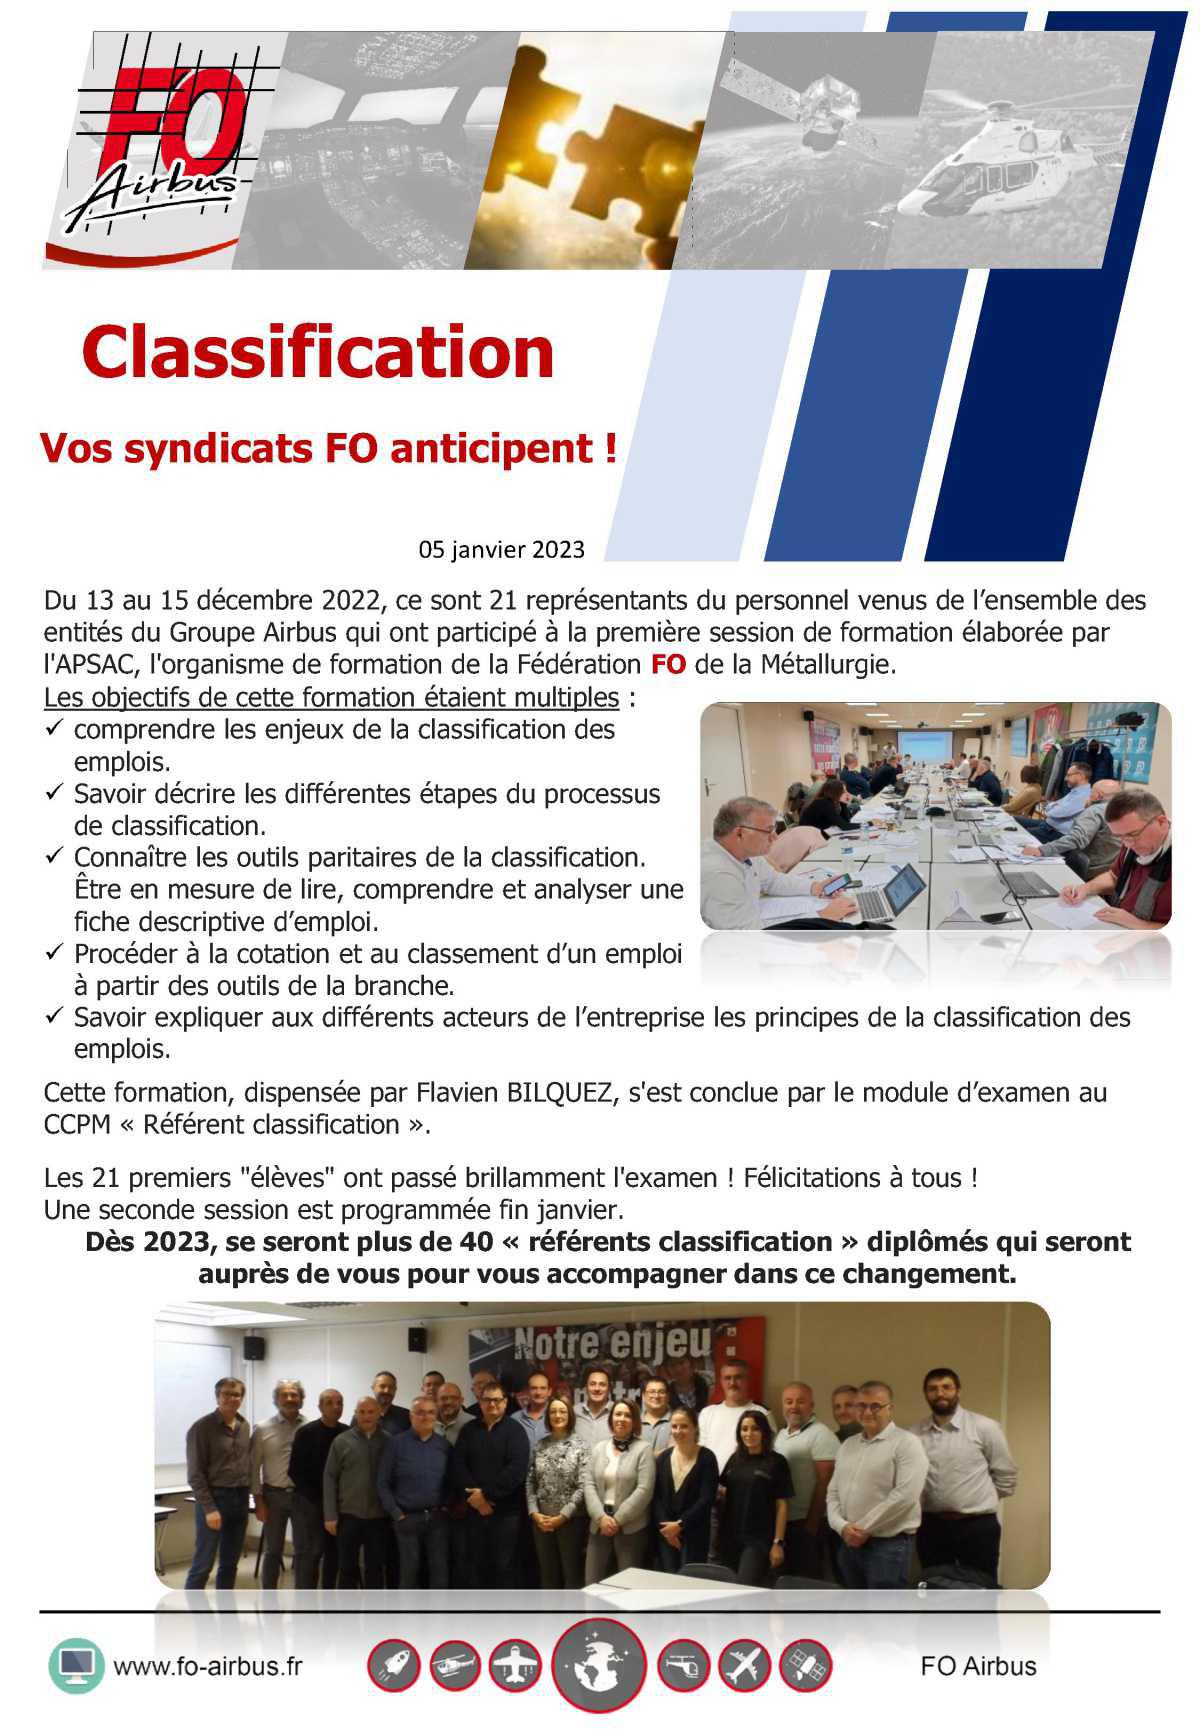 Classification: Vos syndicats FO anticipent !